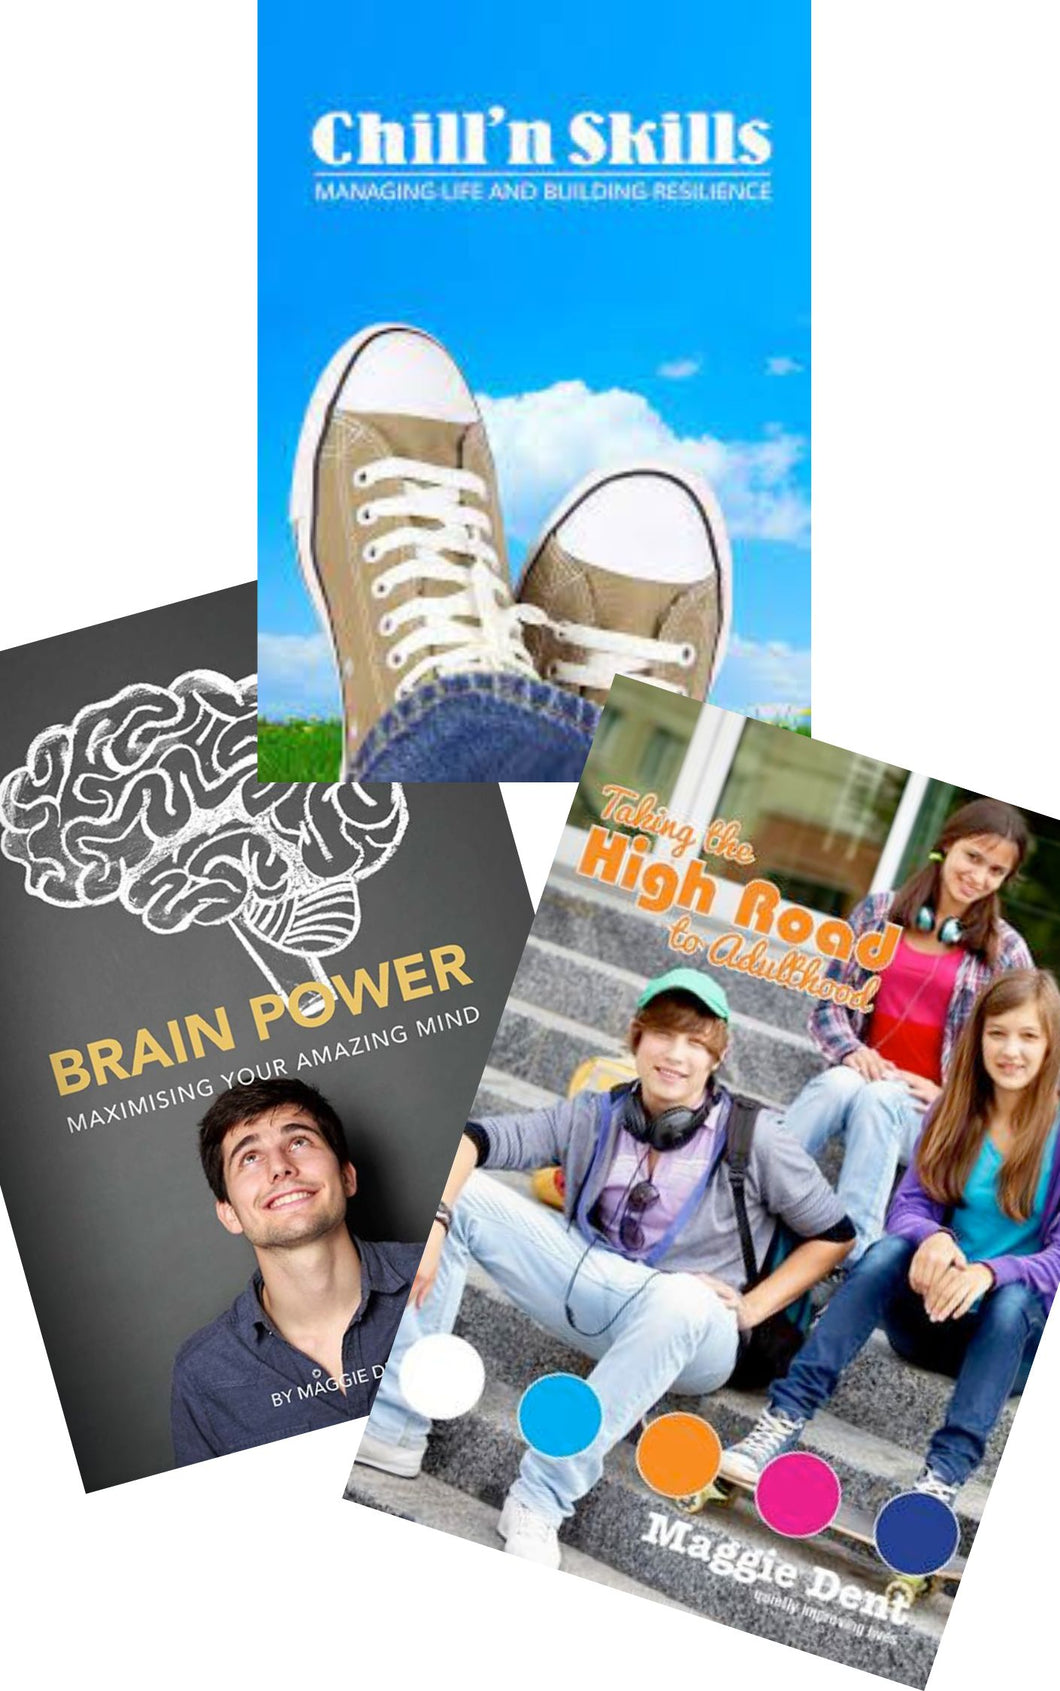 Taking the High Road, Brain Power and Chill'n Skills BUNDLE (eBook)